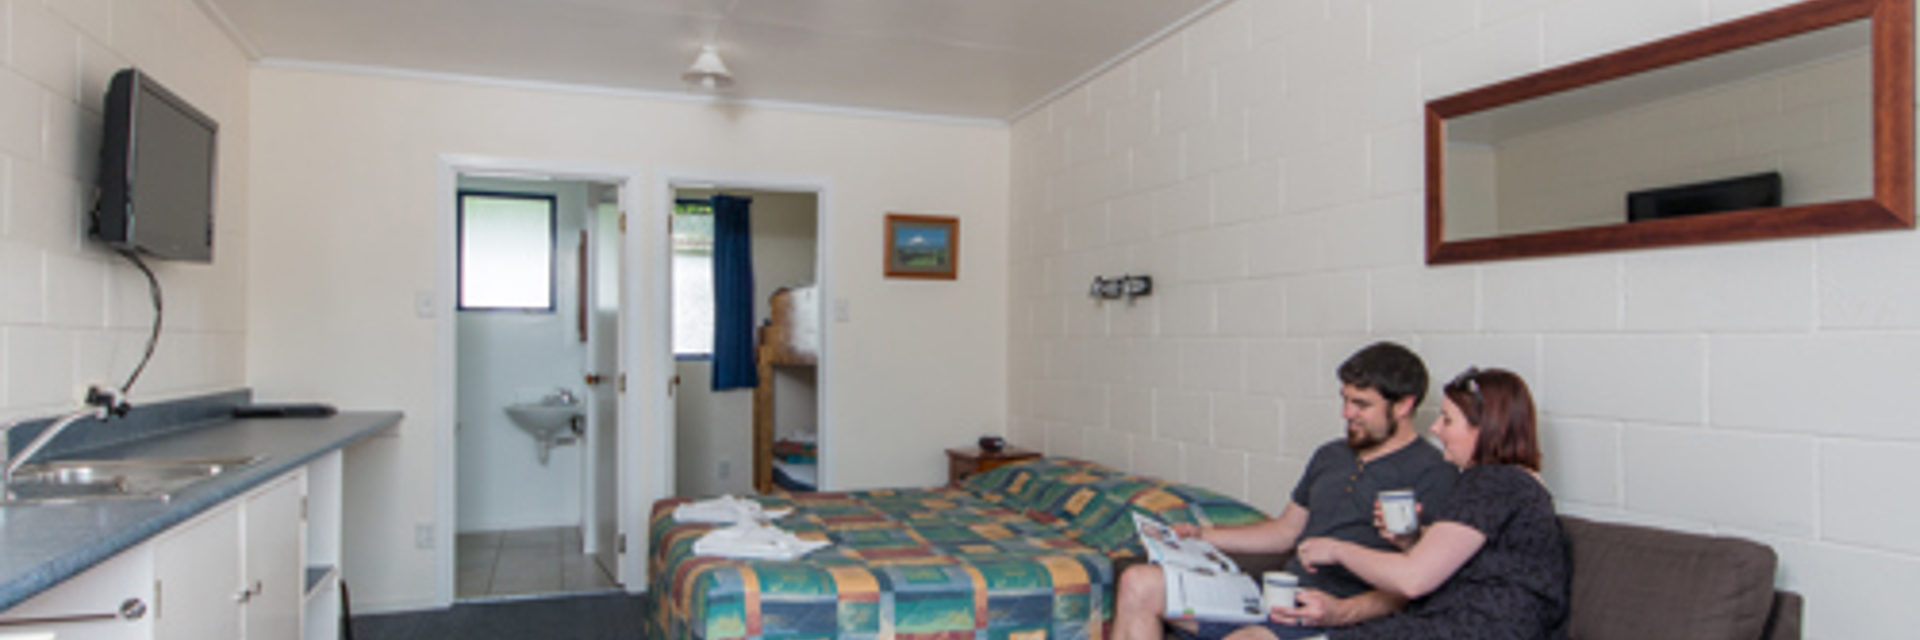 New Plymouth TOP 10 Holiday Park cabins and motels